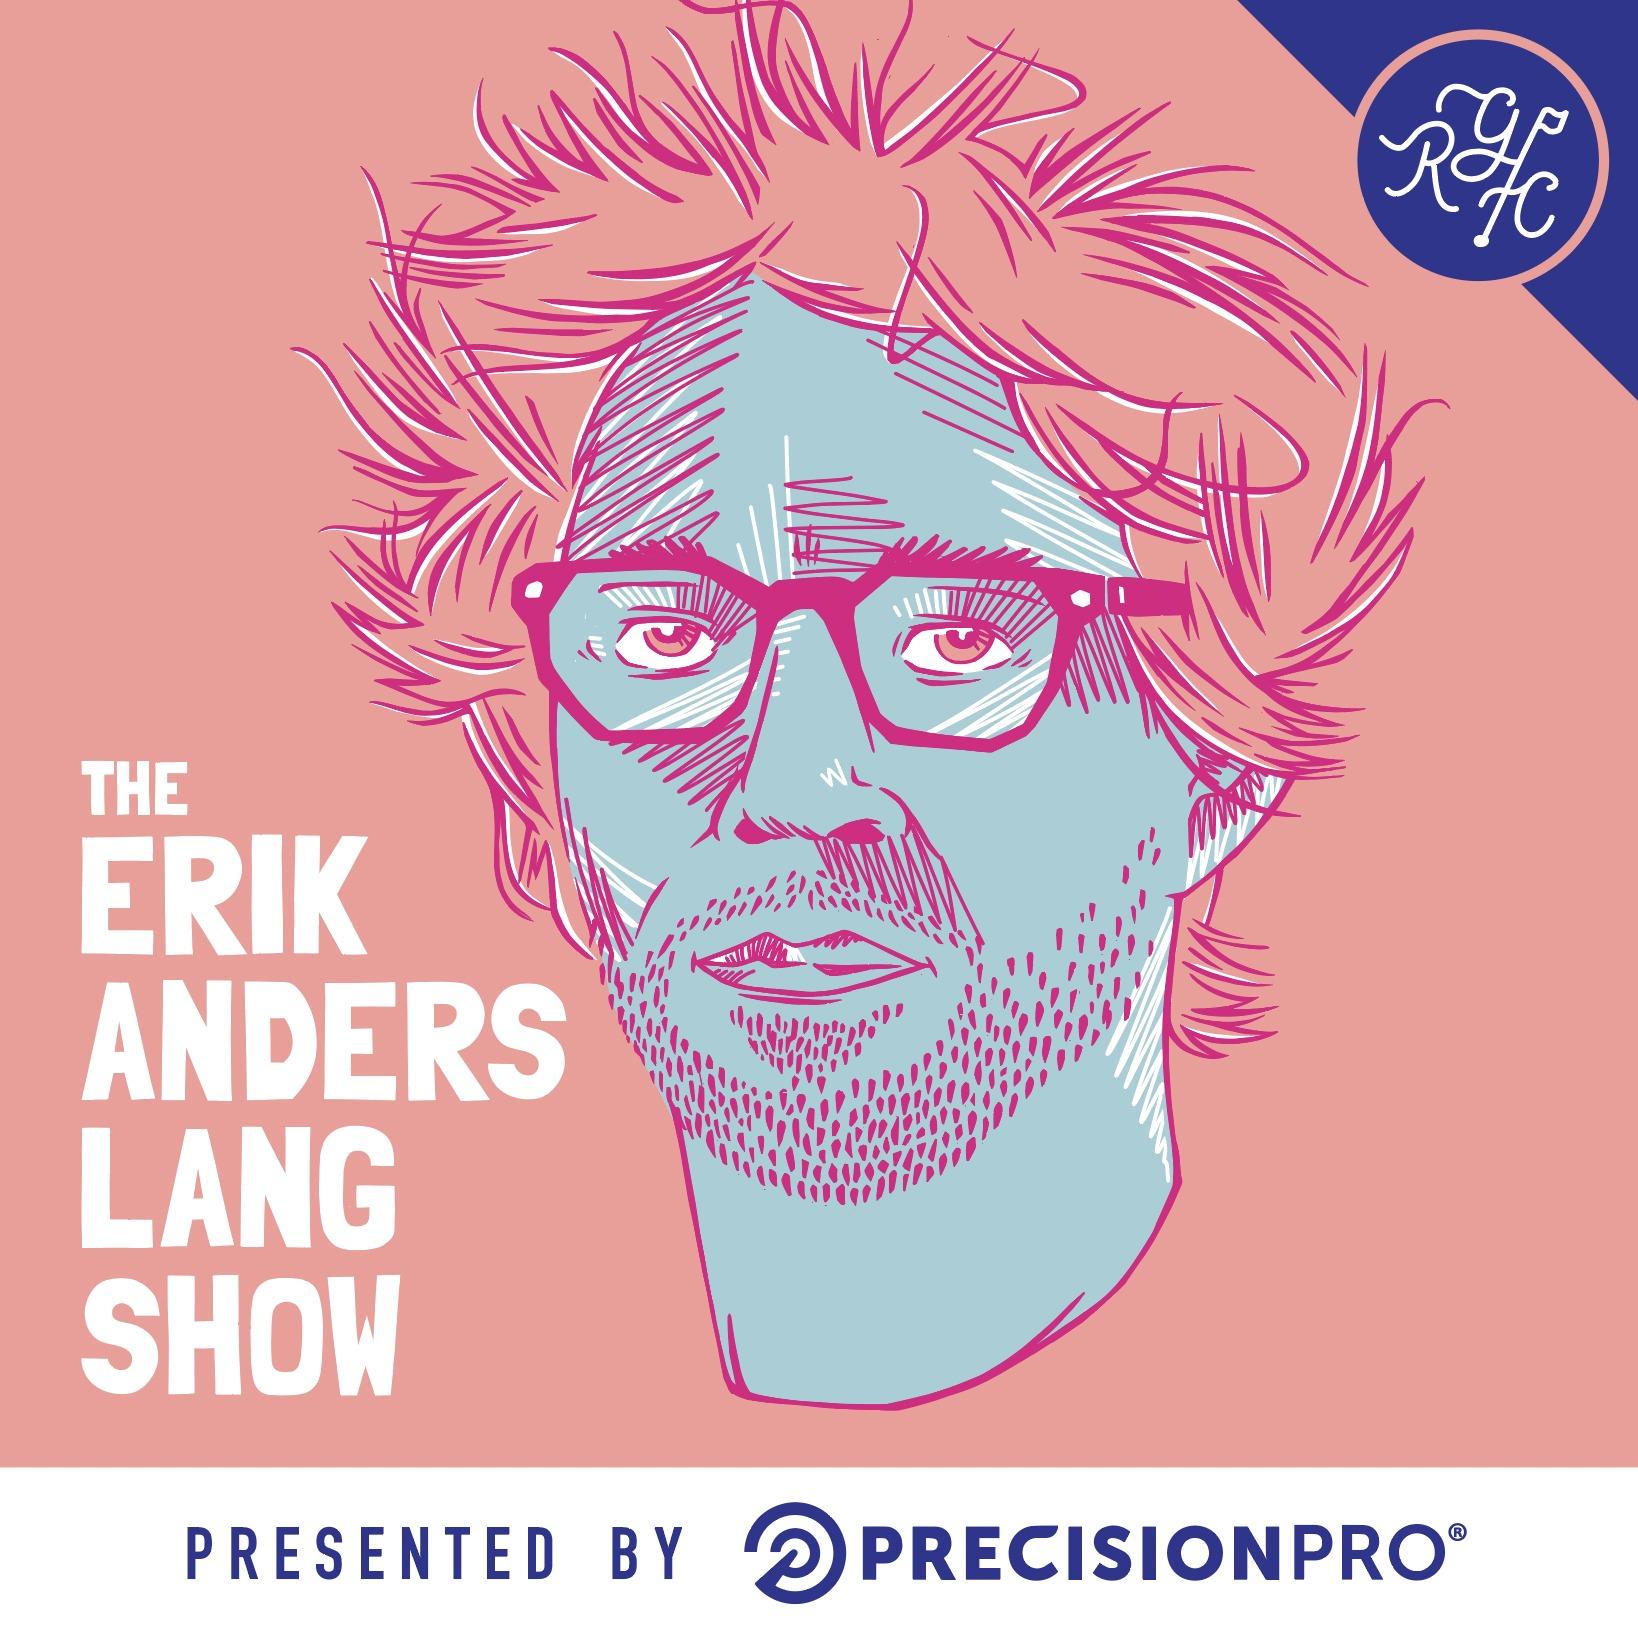 The Erik Anders Lang Show: Golf - Travel - Comedy